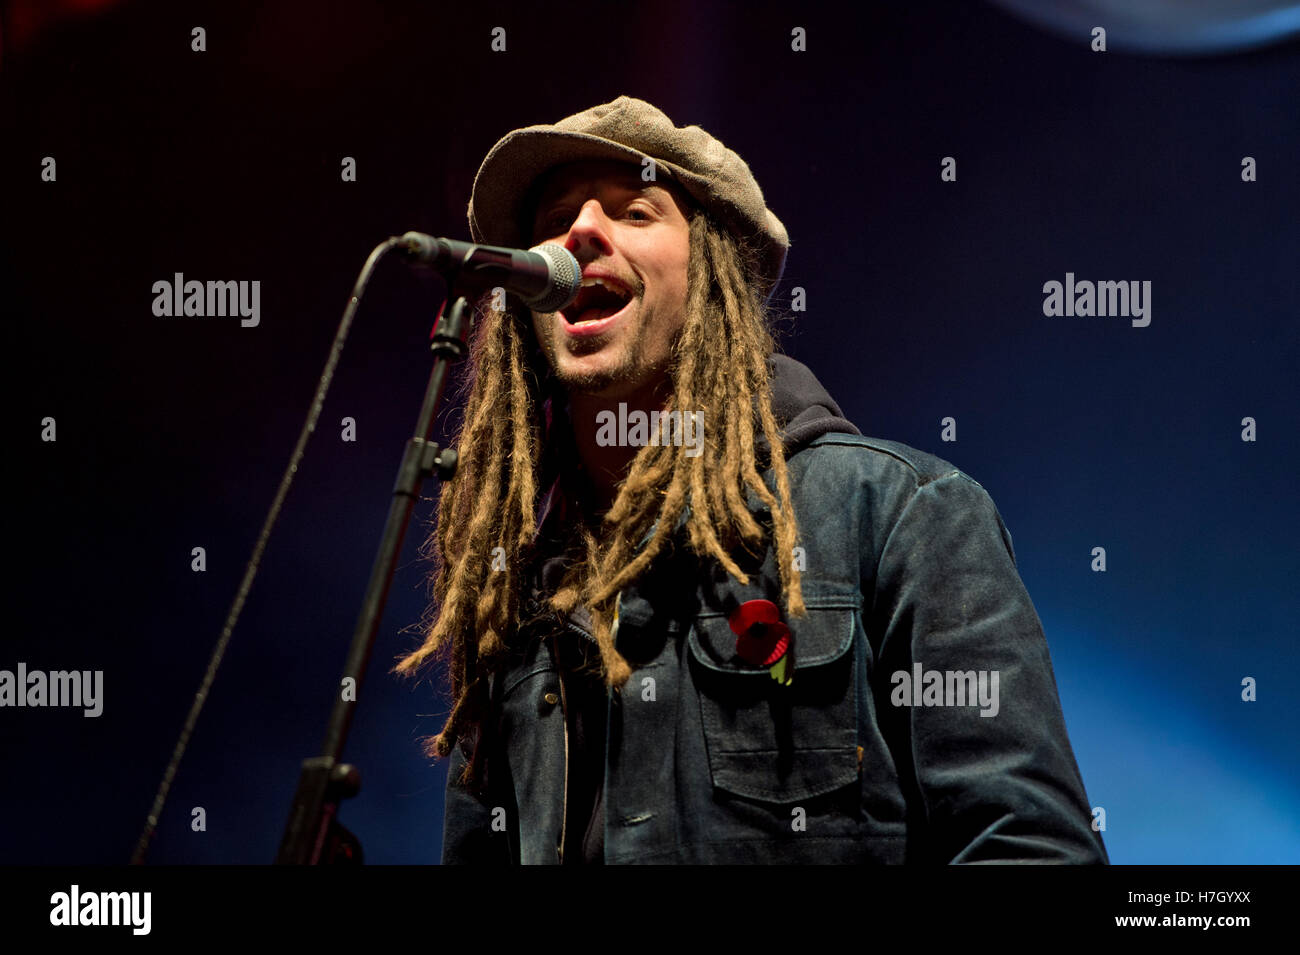 Manchester, UK. 4th November 2016. Musician JP Cooper performs at the annual Christmas Lights Switch-on in Albert Square, Manchester. Credit:  Russell Hart/Alamy Live News. Stock Photo